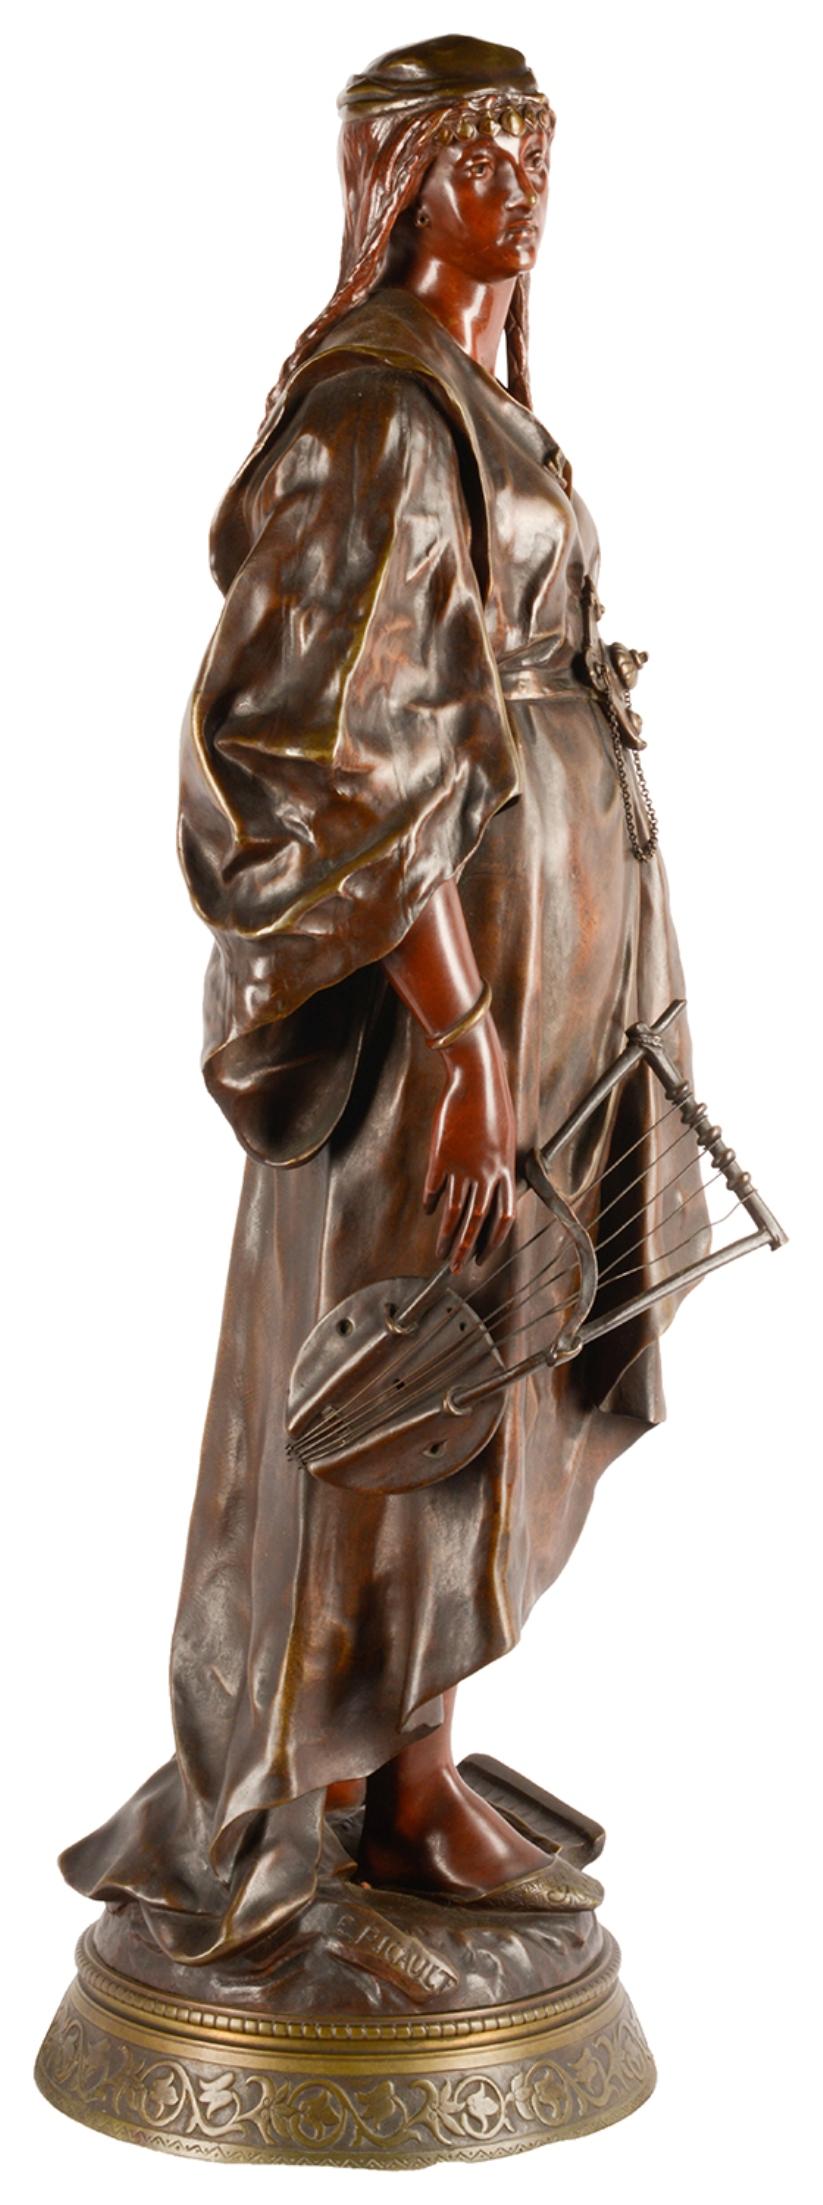 Emile-Louis Picault, a large French orientalist patinated bronze figure of Queen Esther, circa 1870.

A beautiful quality and rare subject bronze figure of a young woman 